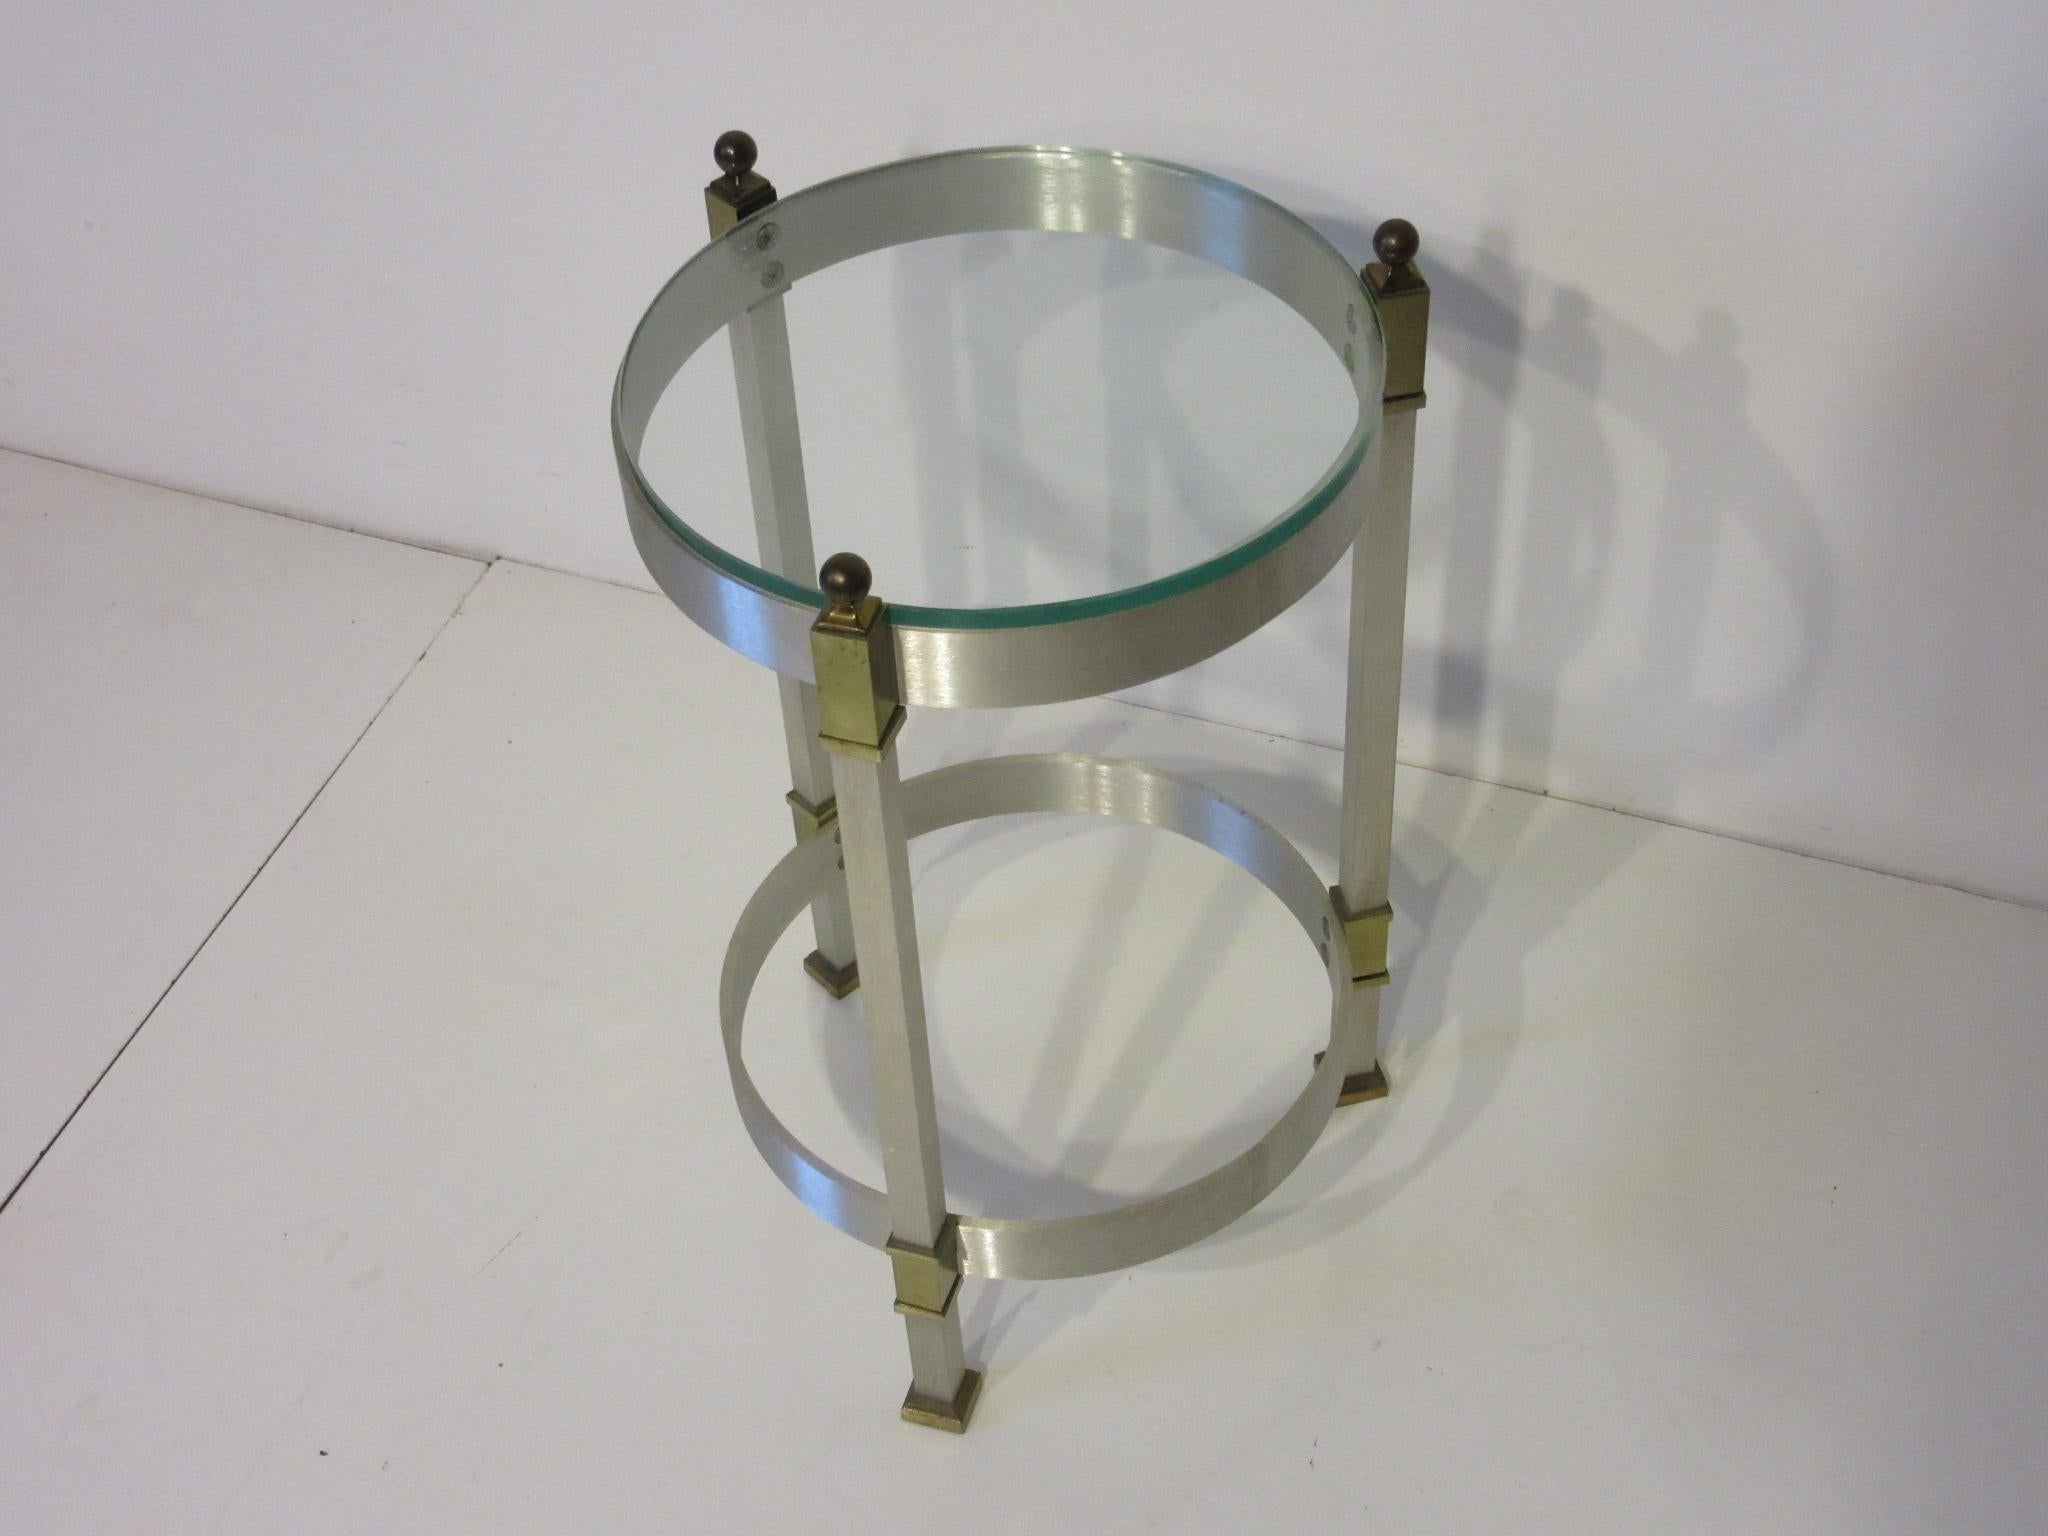 A brushed aluminum, brass detailed plate glass topped round side table or cigarette table, well constructed and the perfect size for that lounge chair or smaller space. Designed in the manner of Maison Jansen.